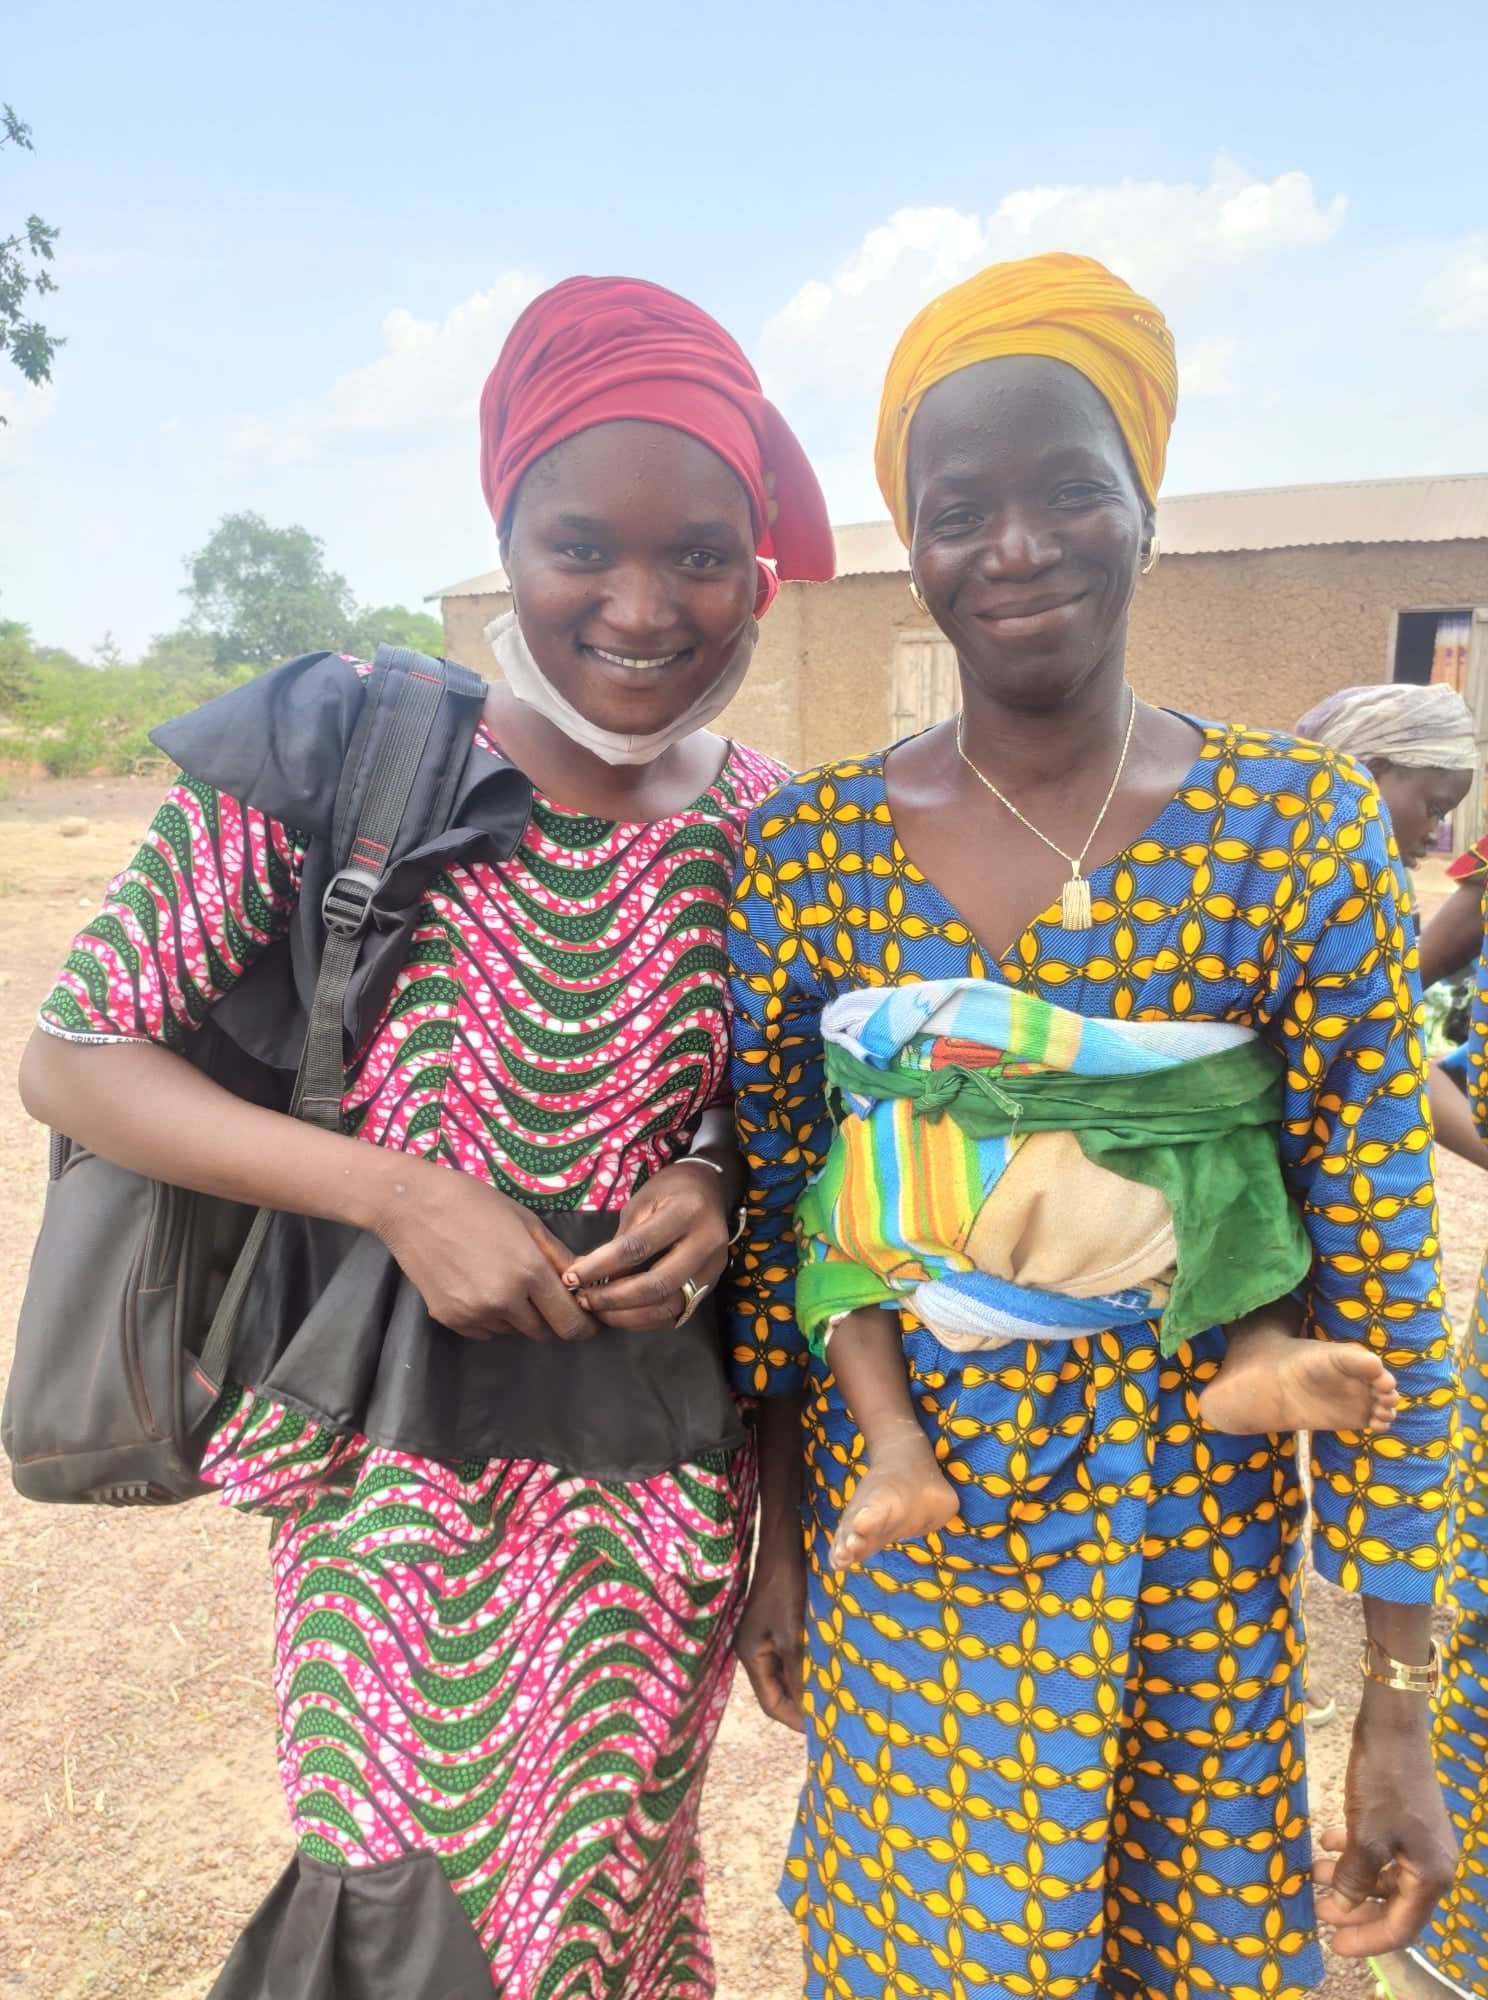 Mariam and her eldest daughter, Kadiatou -- soon to be a fully fledged nurse's assistant/midwife, pose for the camera.